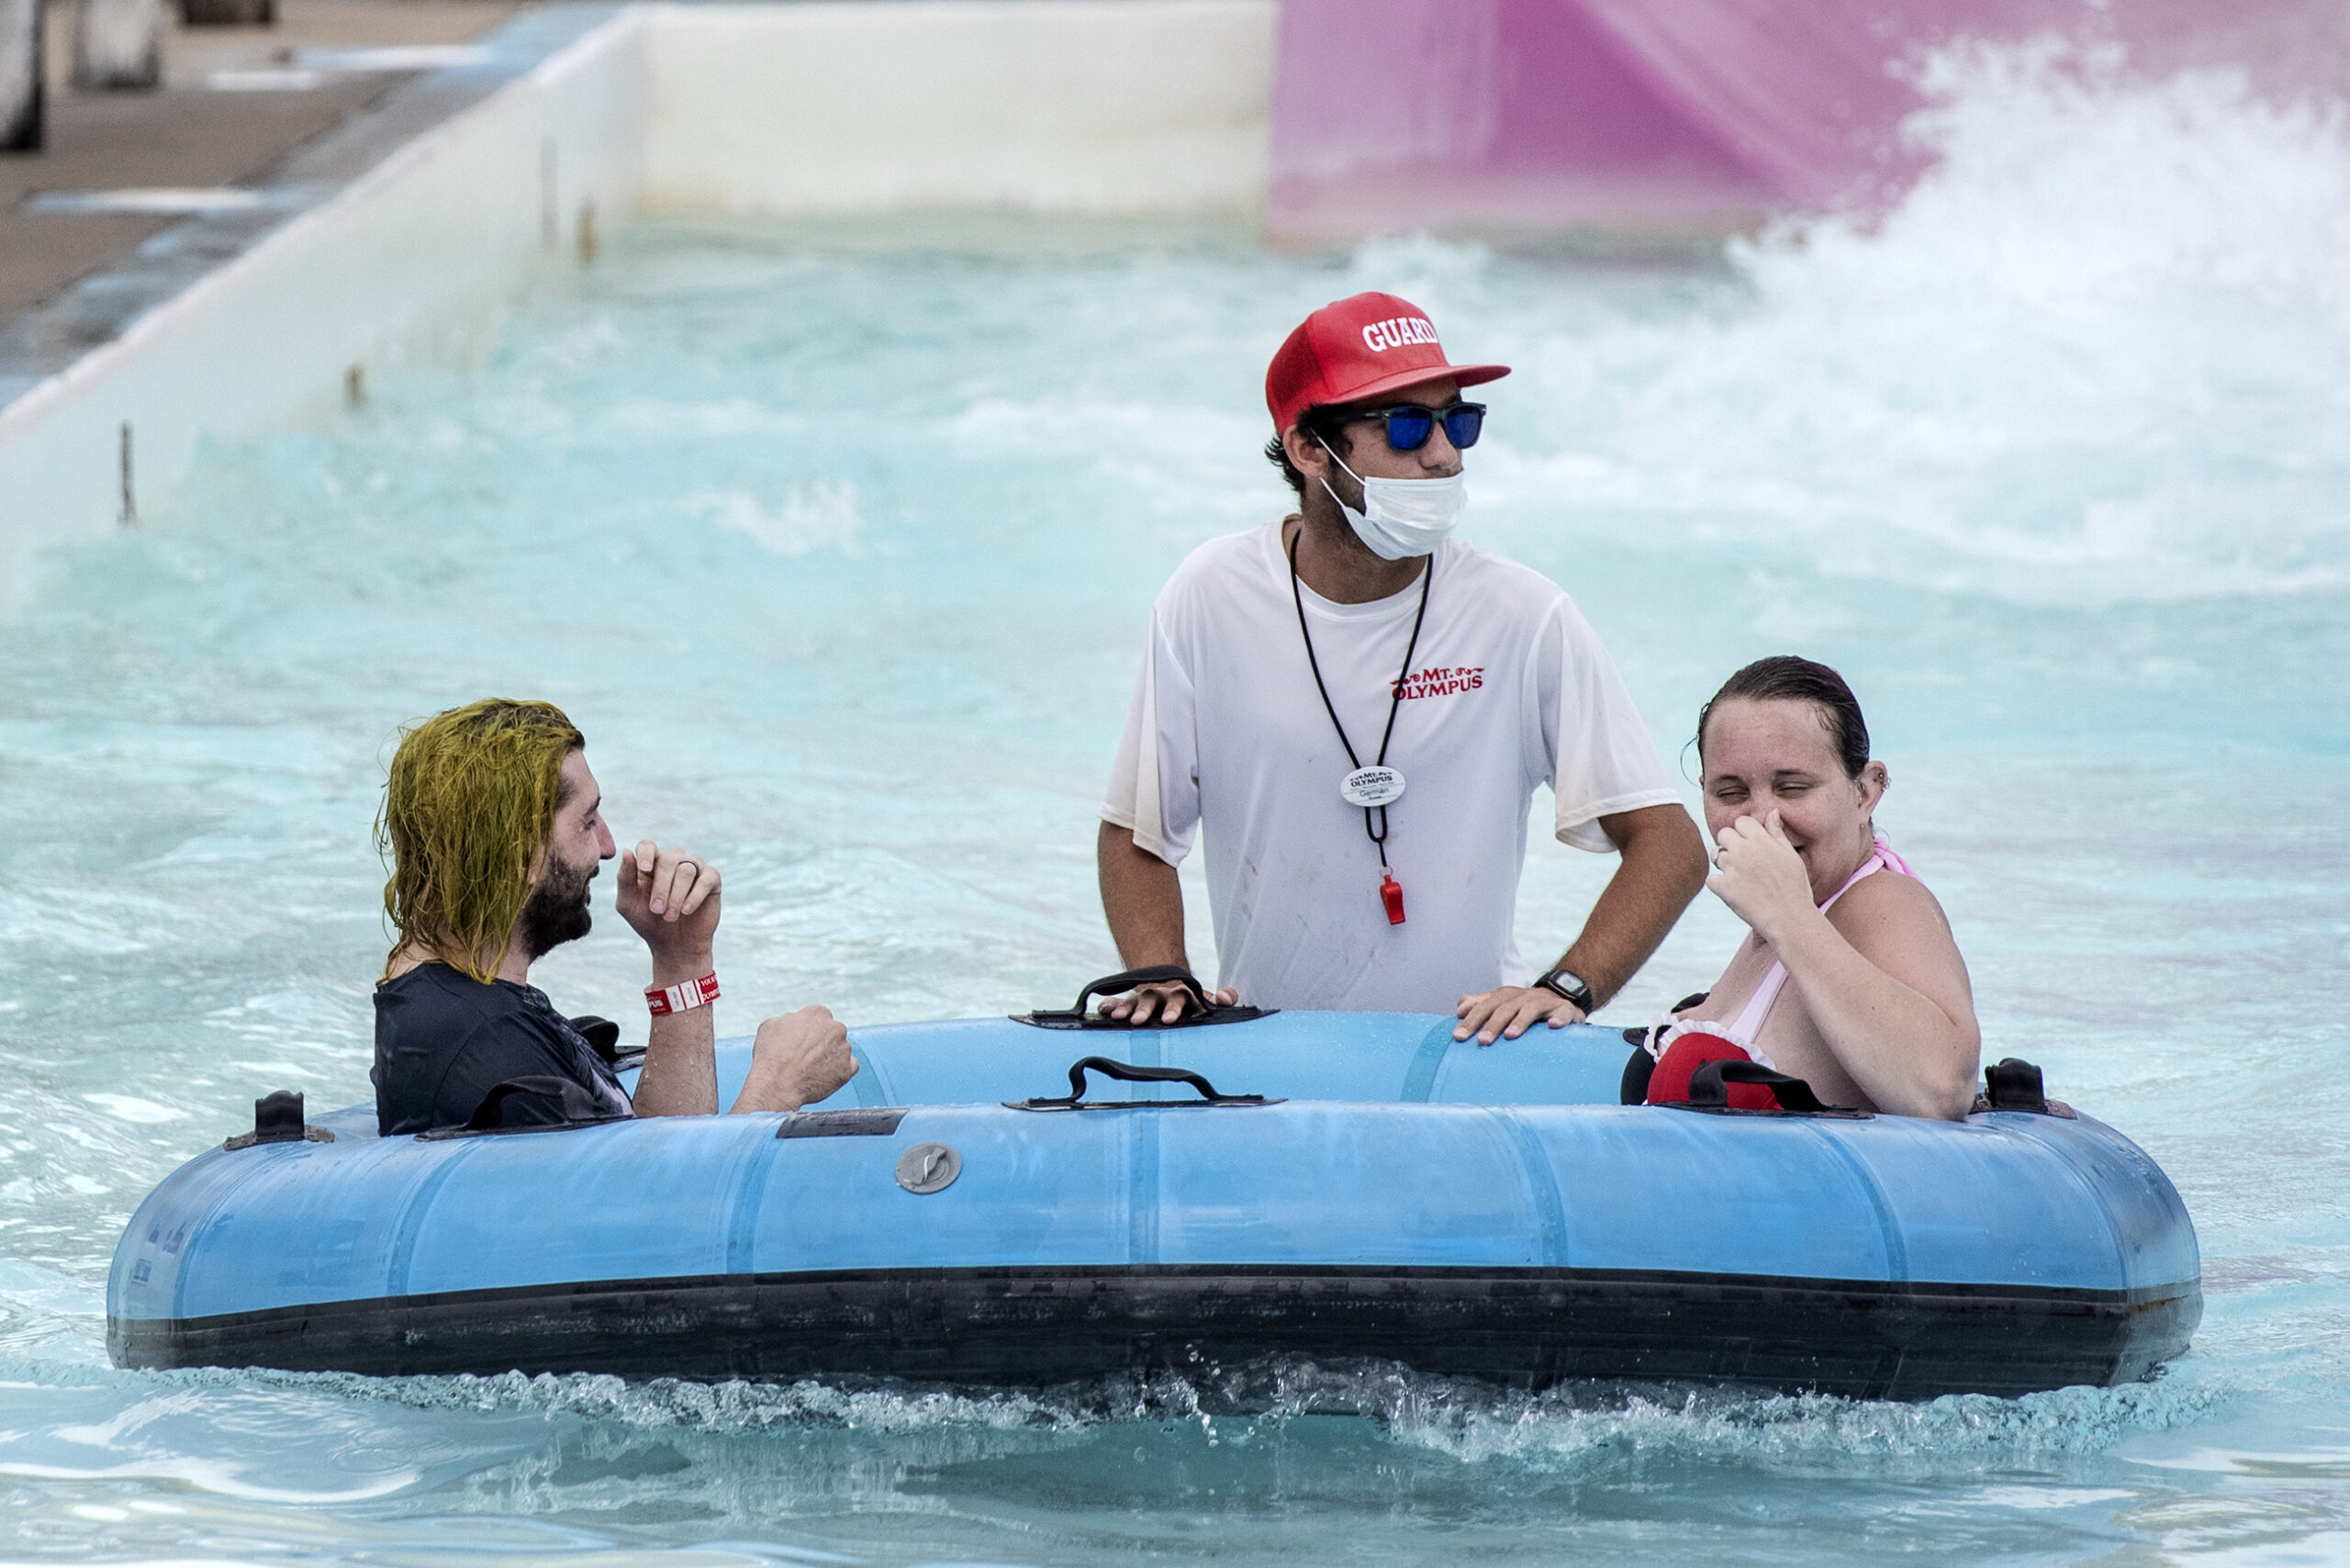 two people in a raft are pushed by a worker in a face mask at the bottom of a water slide